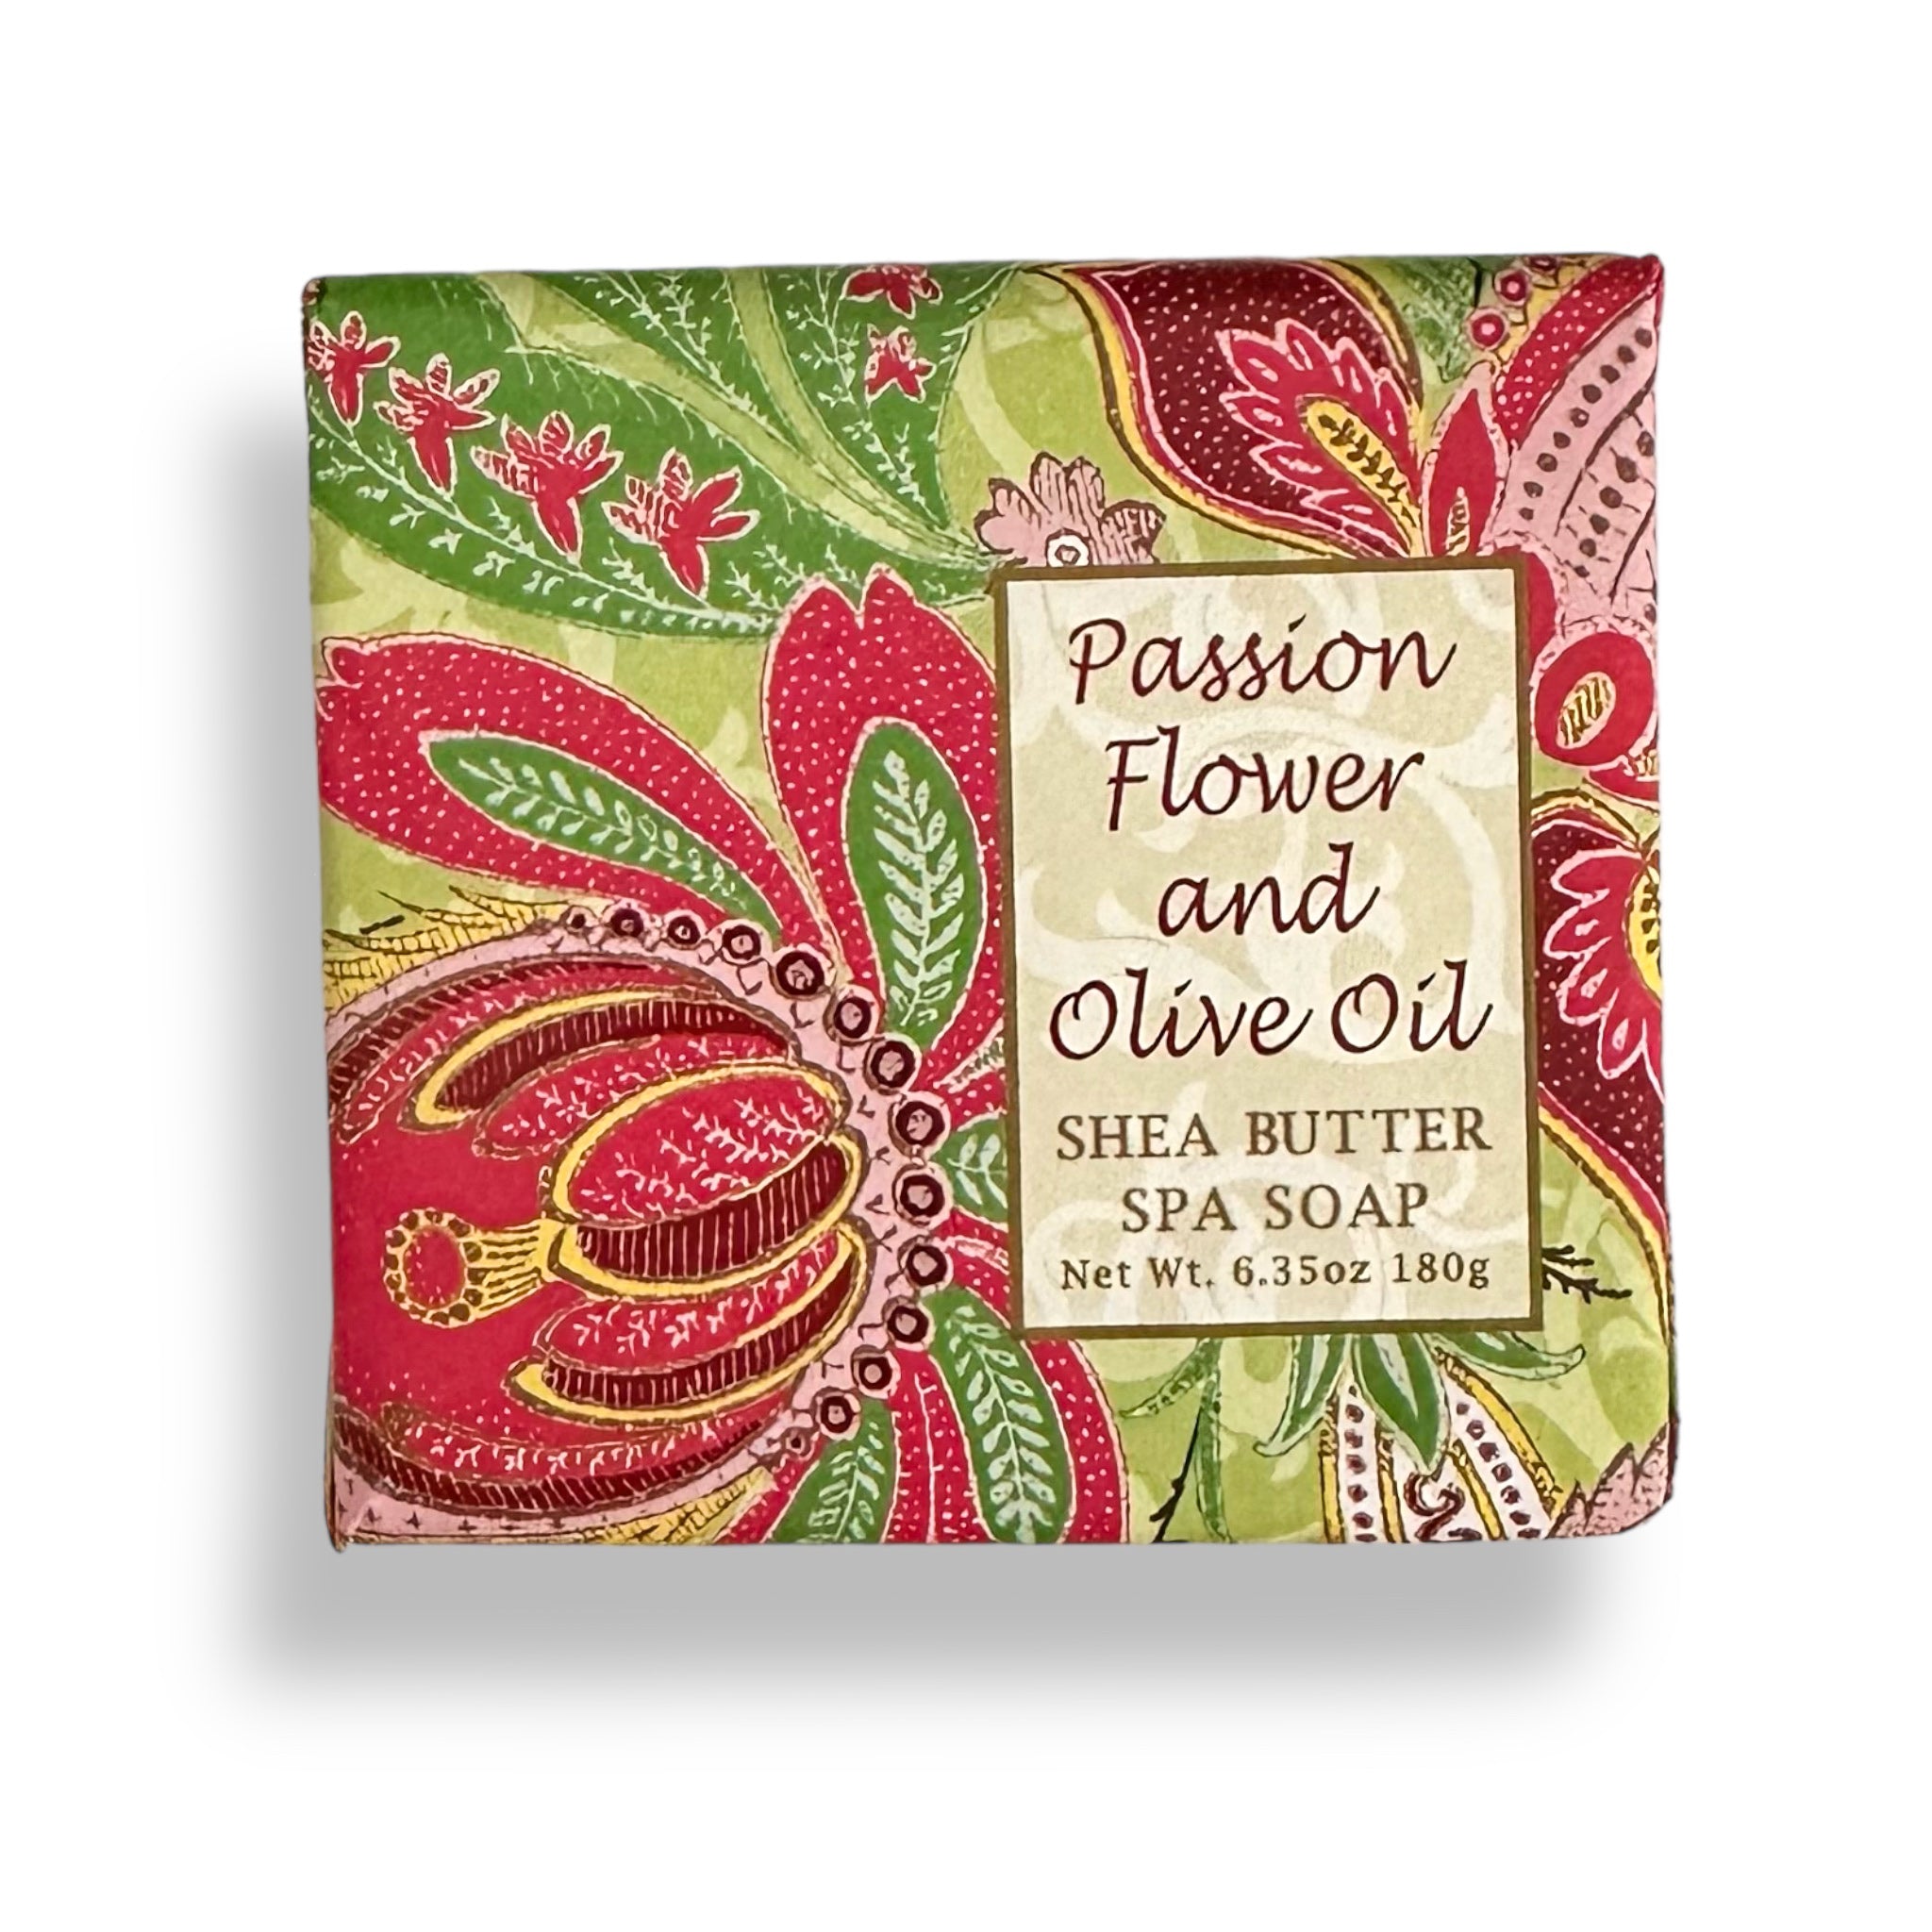 Greenwich Bay Trading Company PASSION Flower & OLIVE OIL soap 6.3 oz